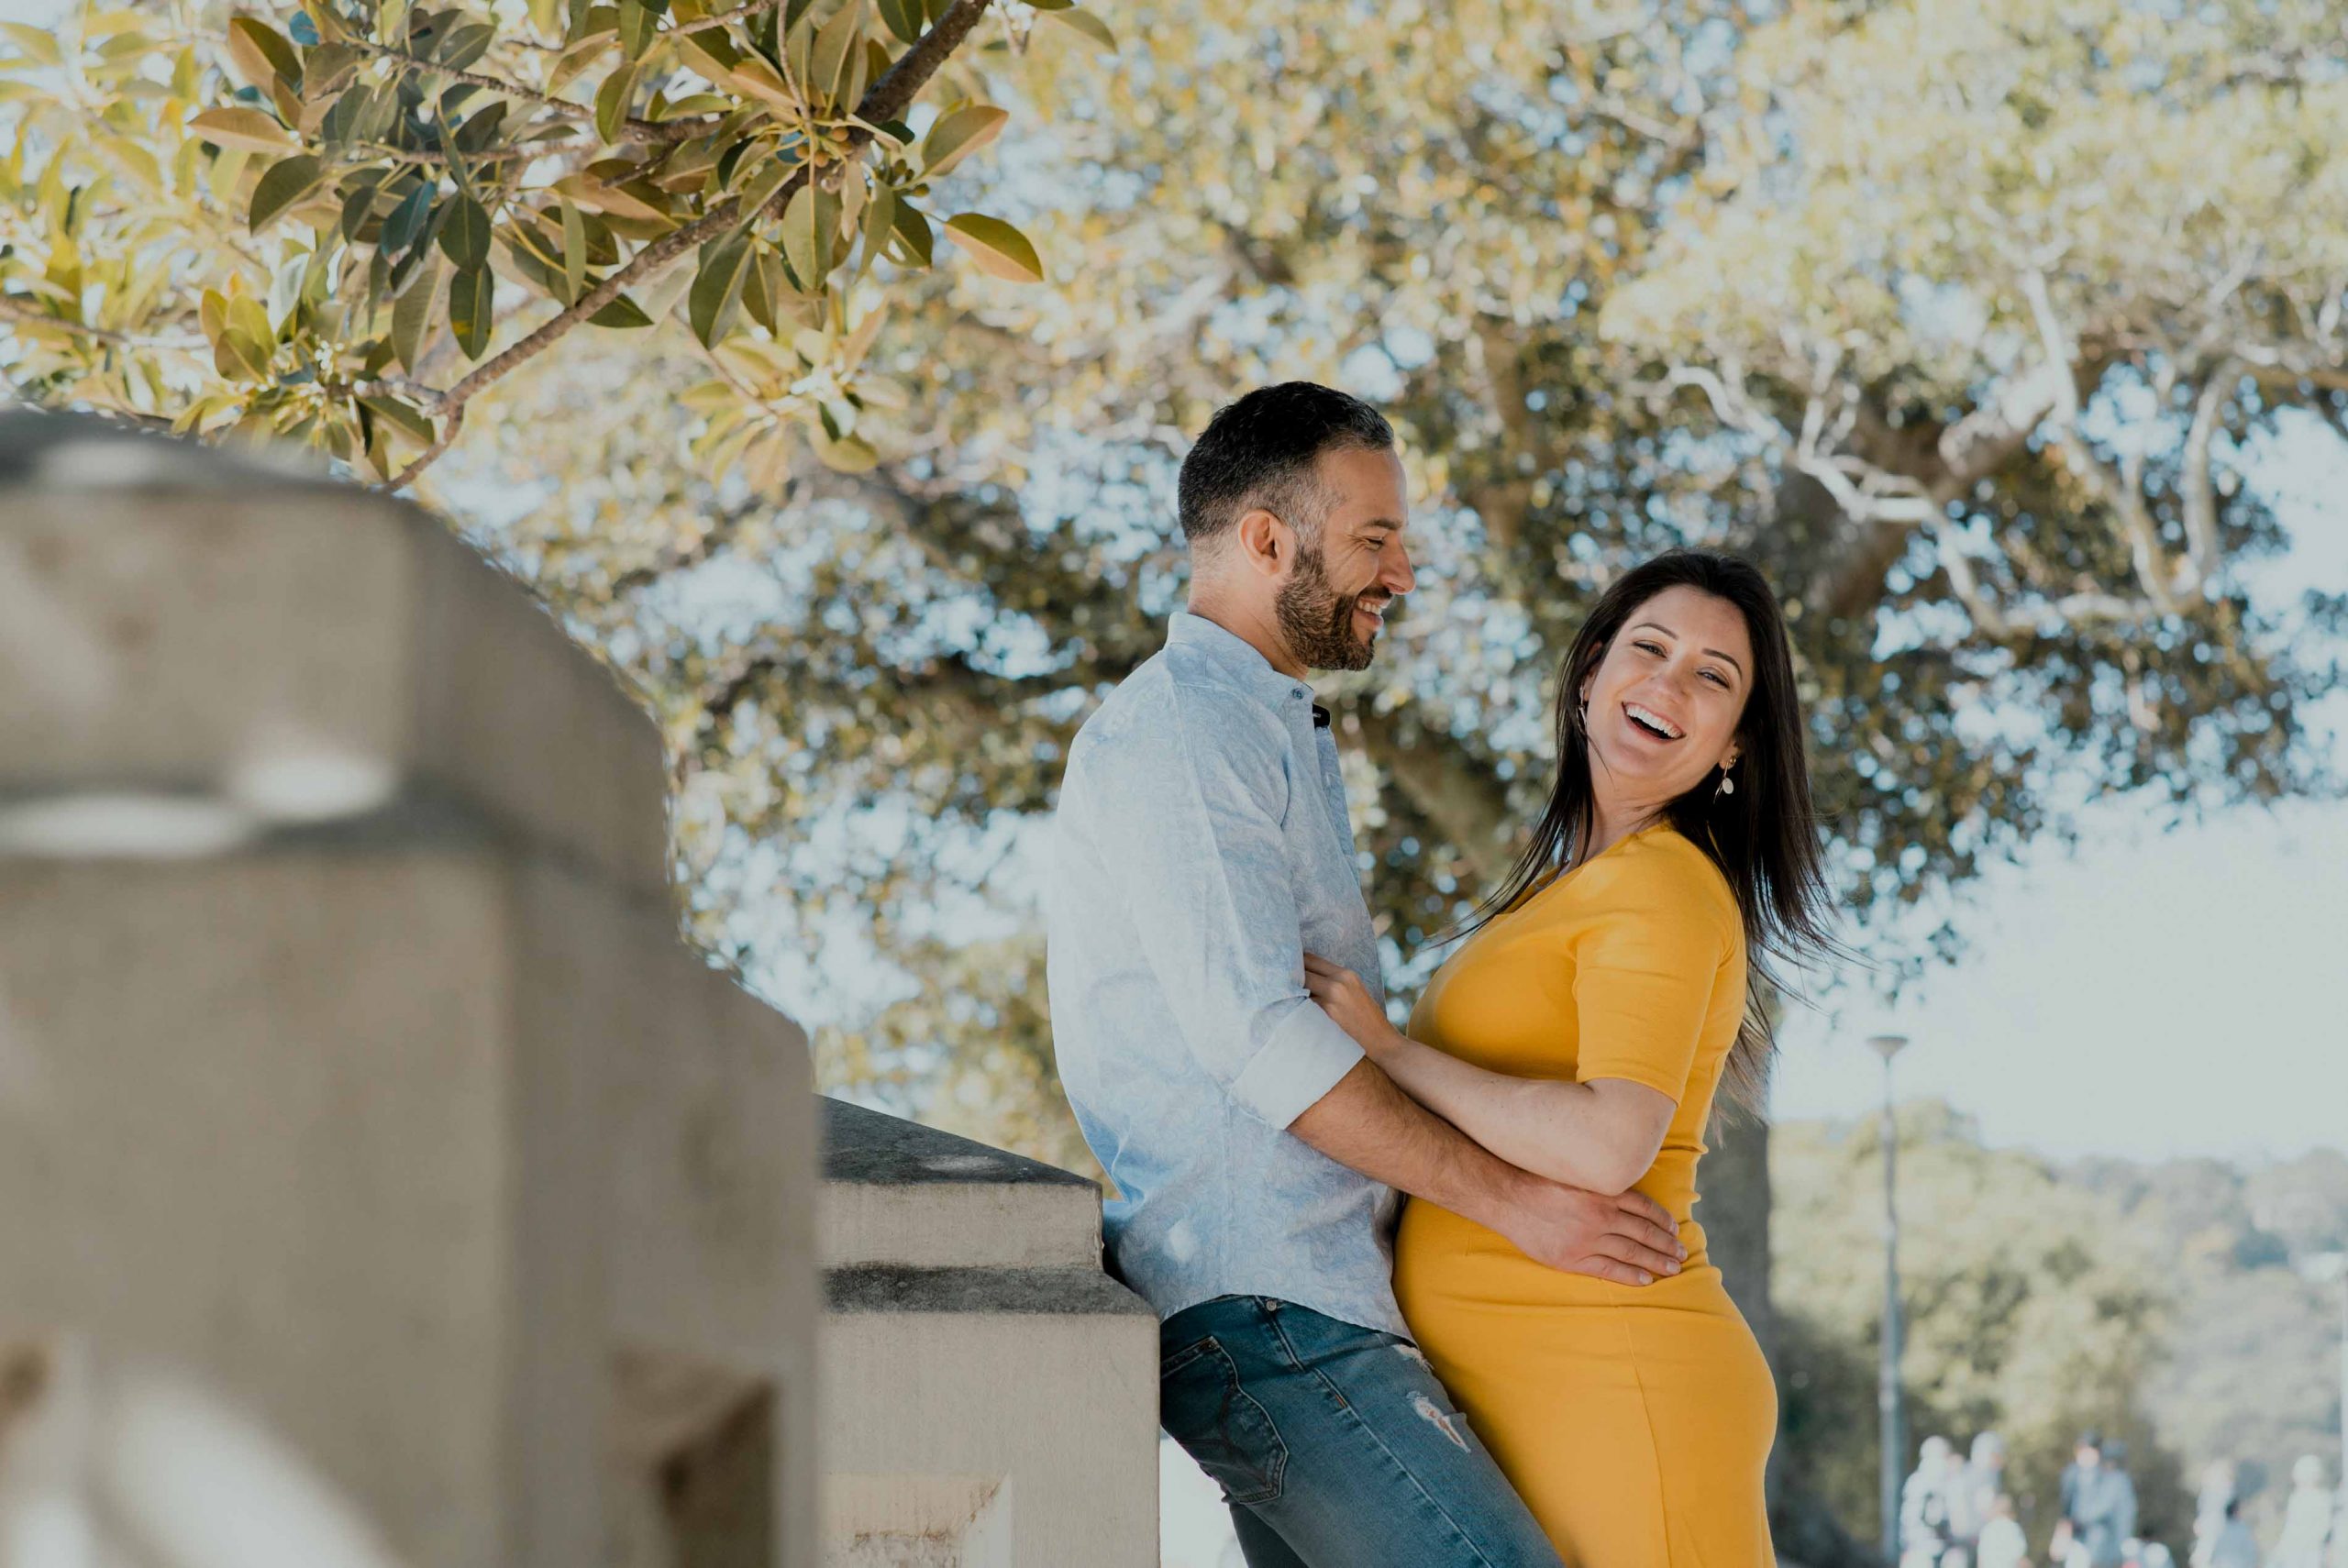 maternity films and photos: parents to be in a park, hugging each other